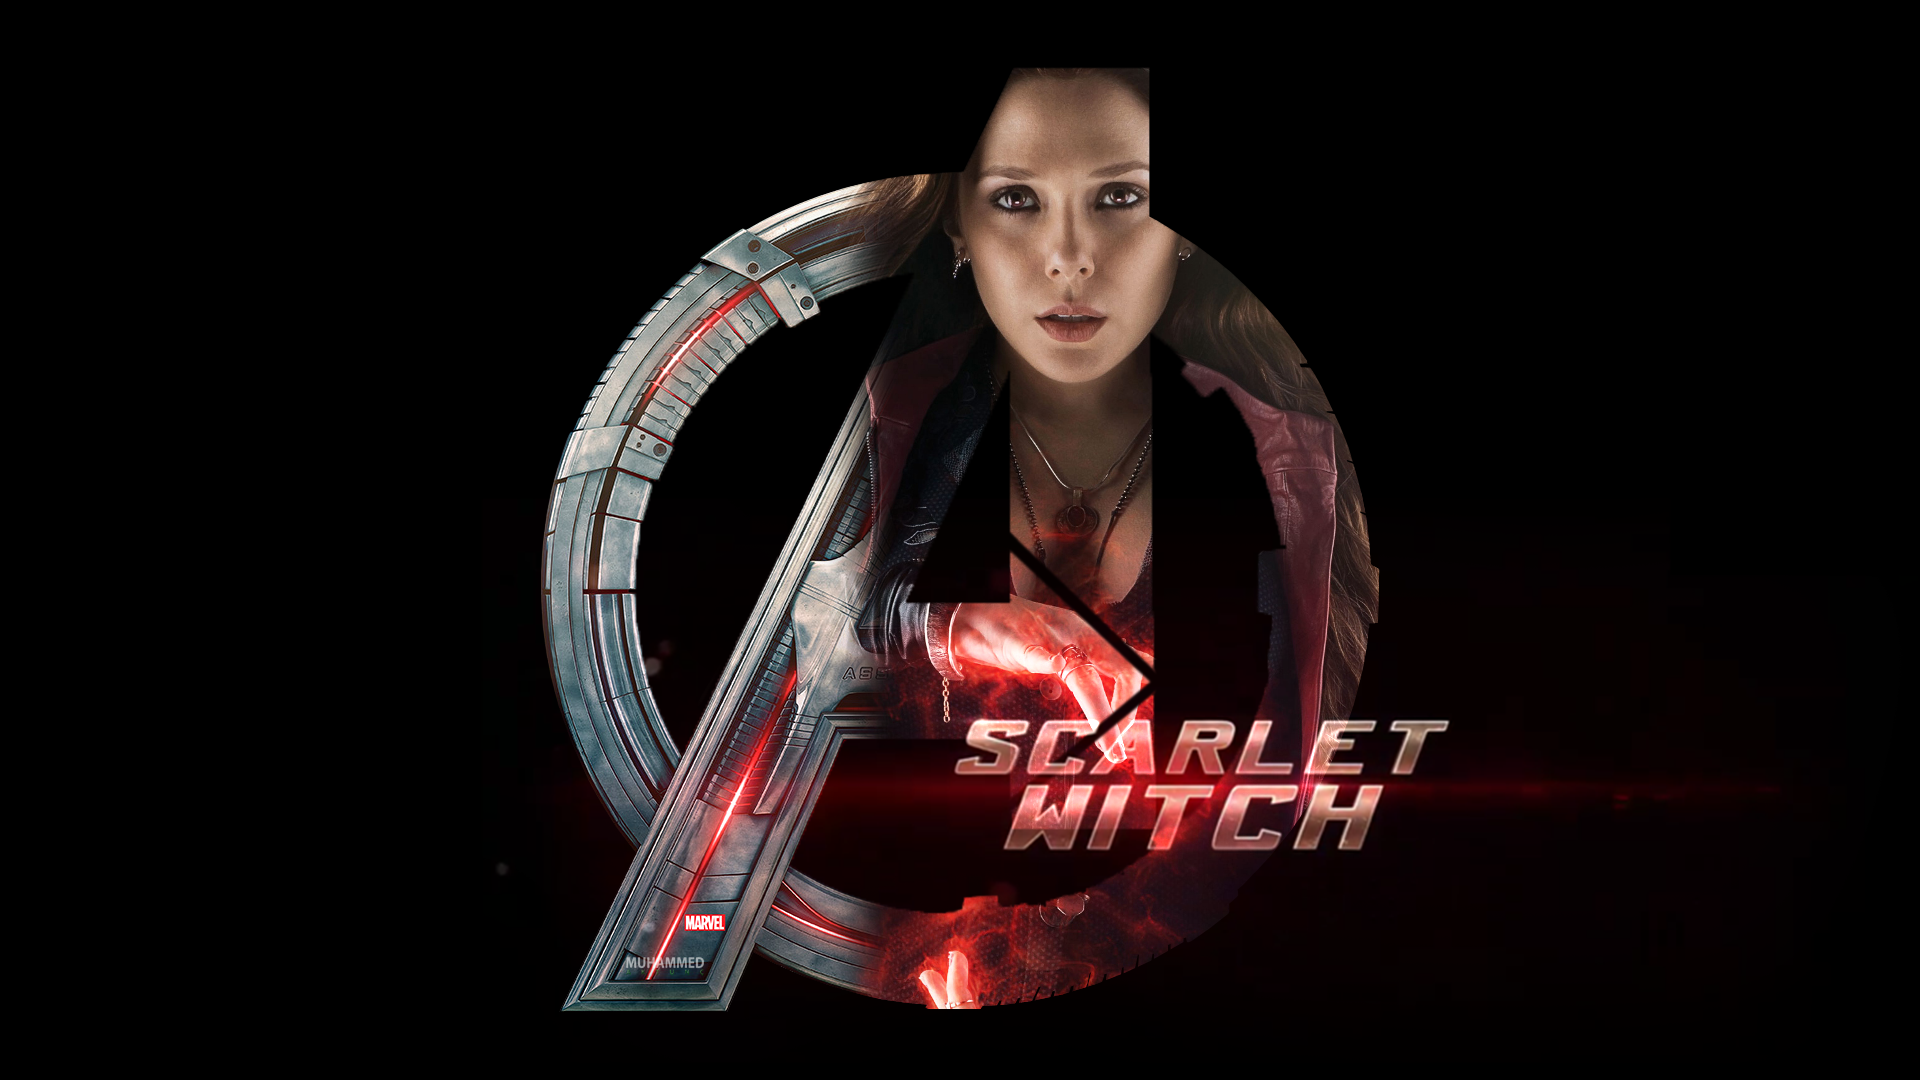  Avengers Age of Ultron Scarlet Witch by muhammedaktunc on